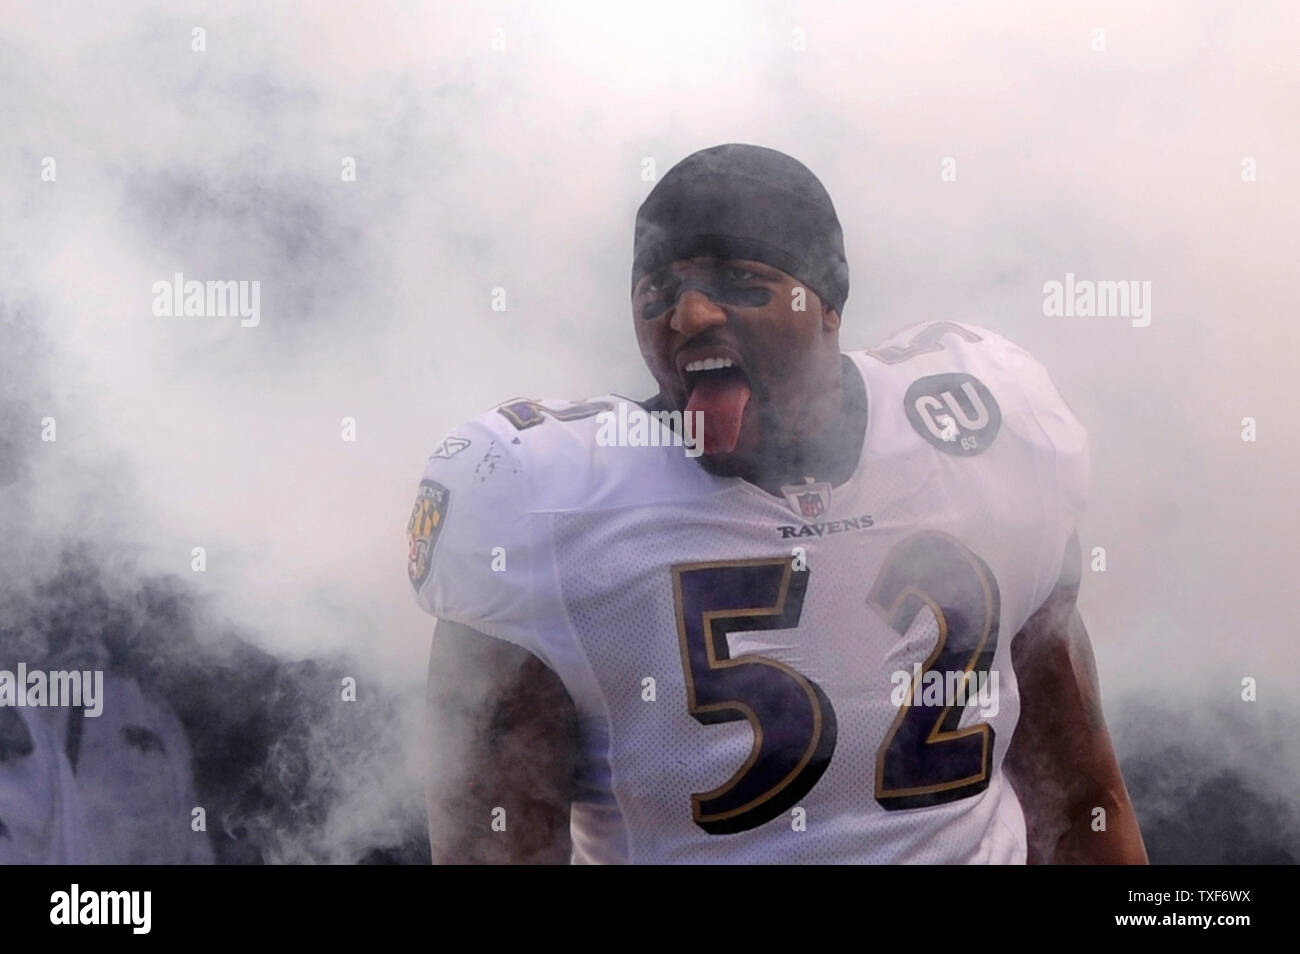 Terrell suggs hi-res stock photography and images - Page 2 - Alamy